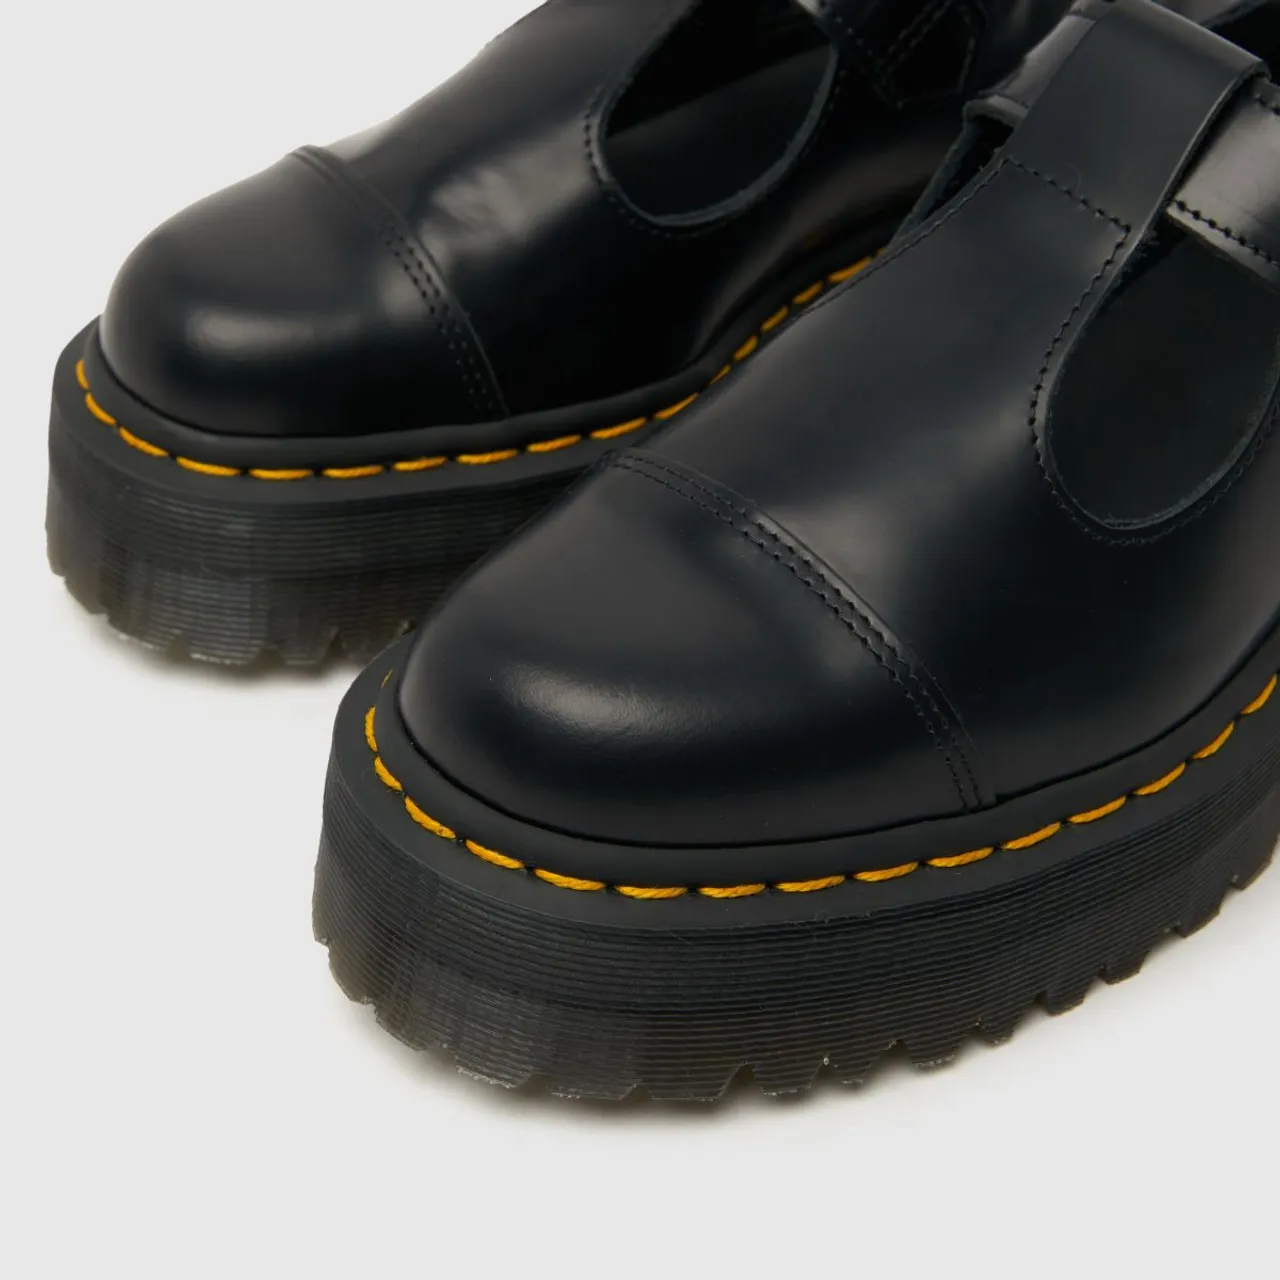 Dr. Martens Ladies Black Bethan Mary Jane Flat Shoes